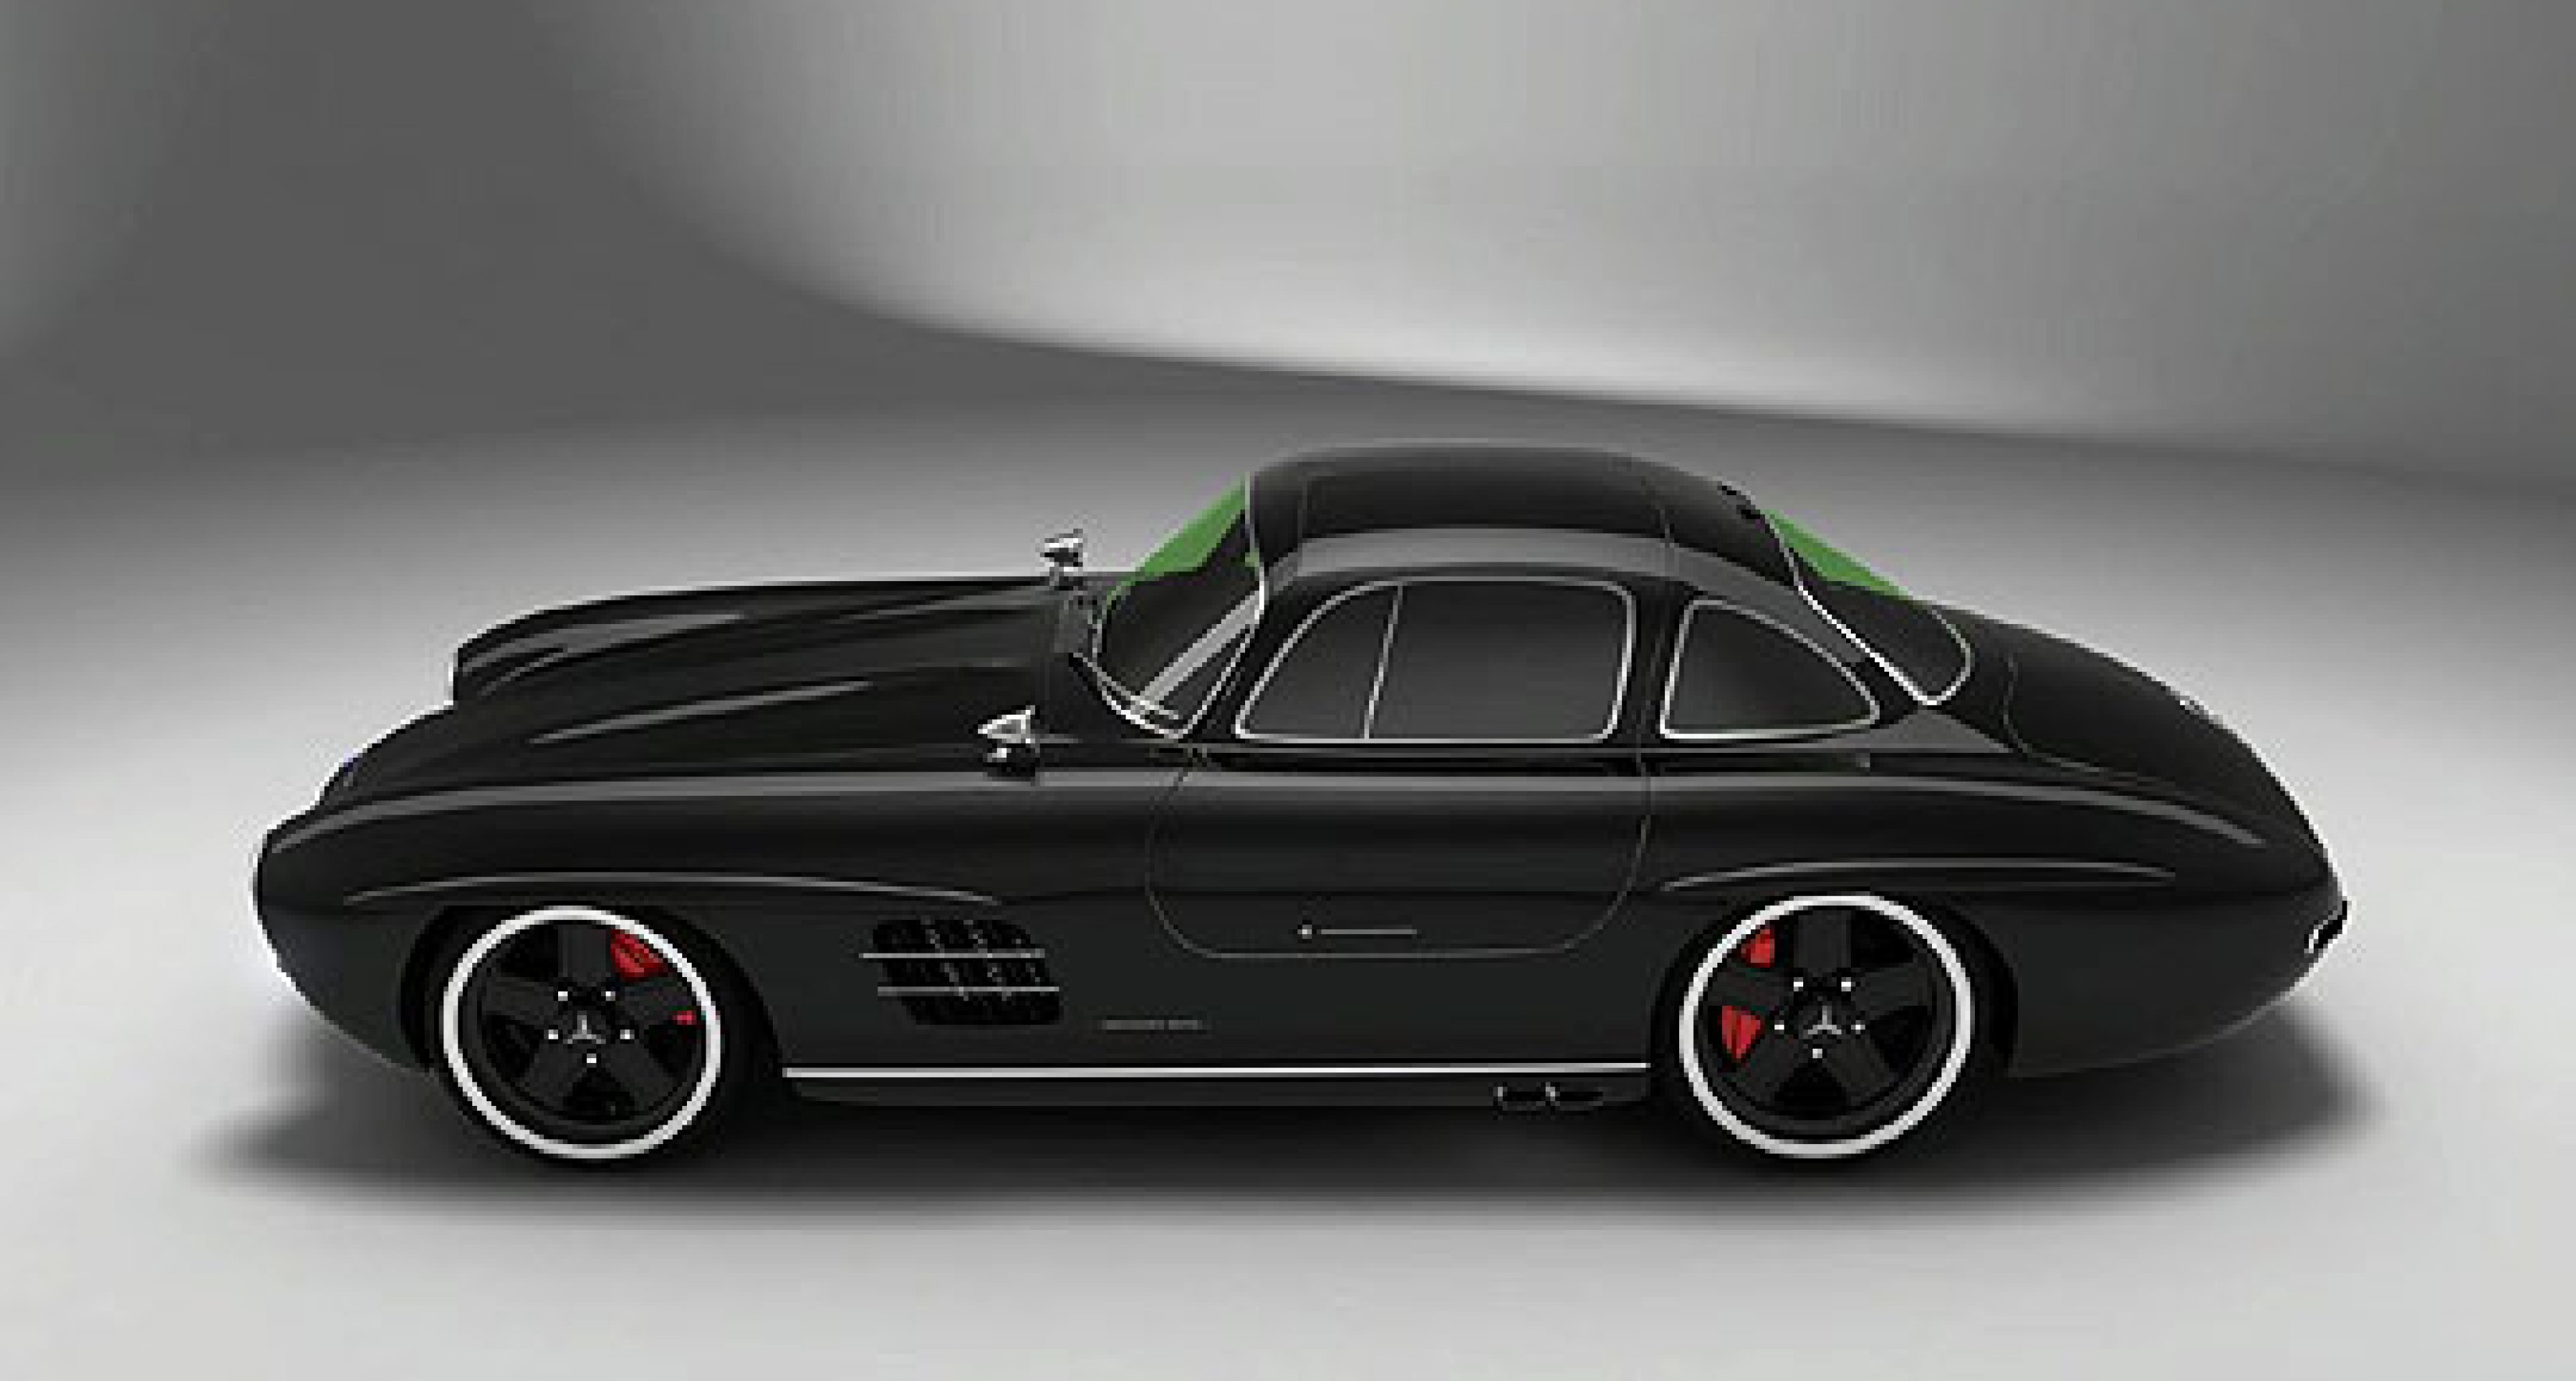 300SL Gullwing for 2009